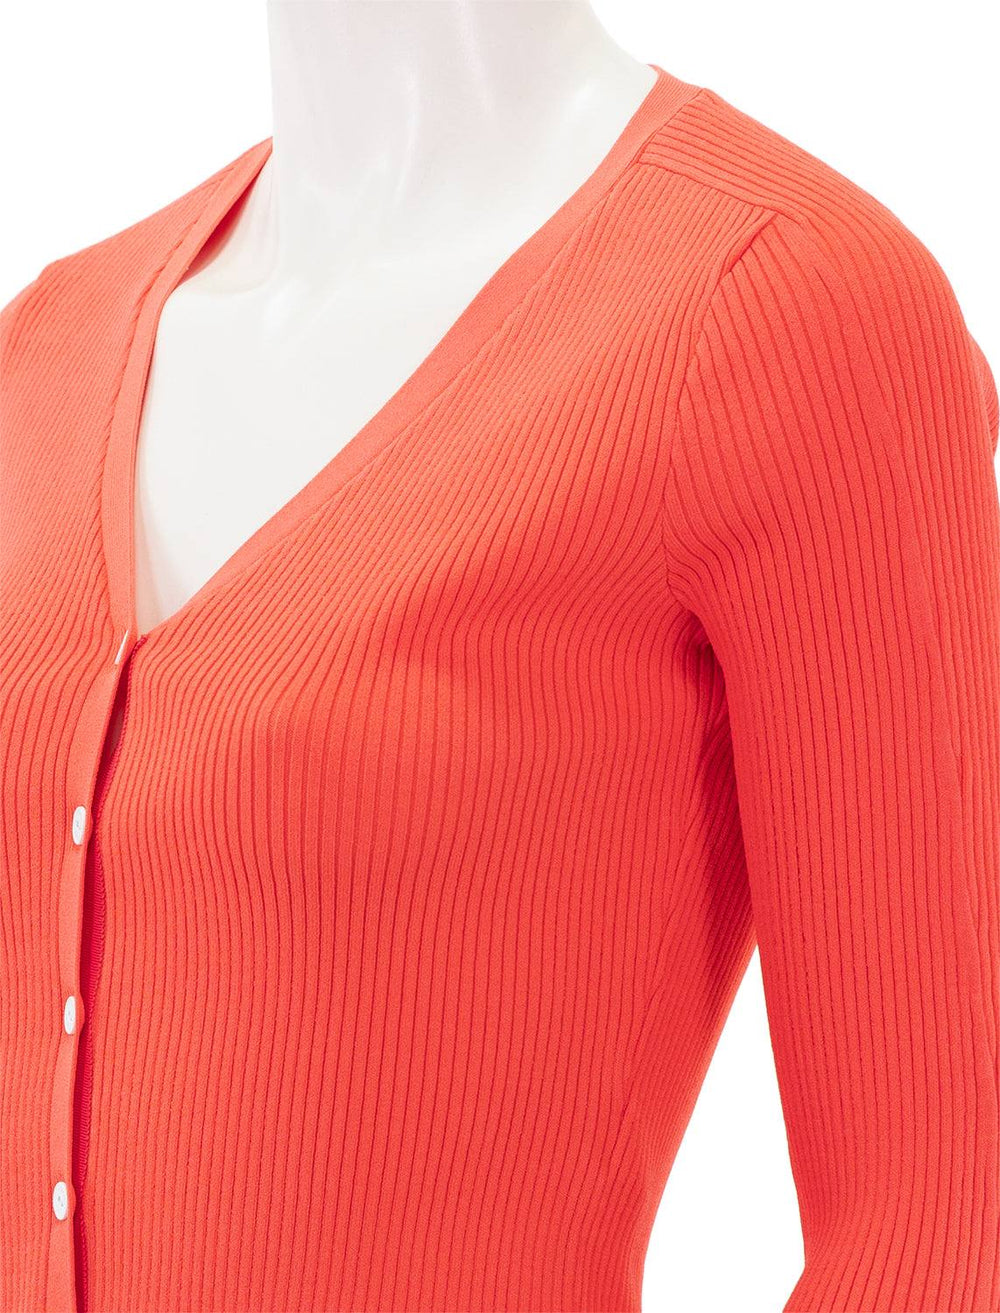 Close-up view of Rag & Bones's asher v cardigan in coral.